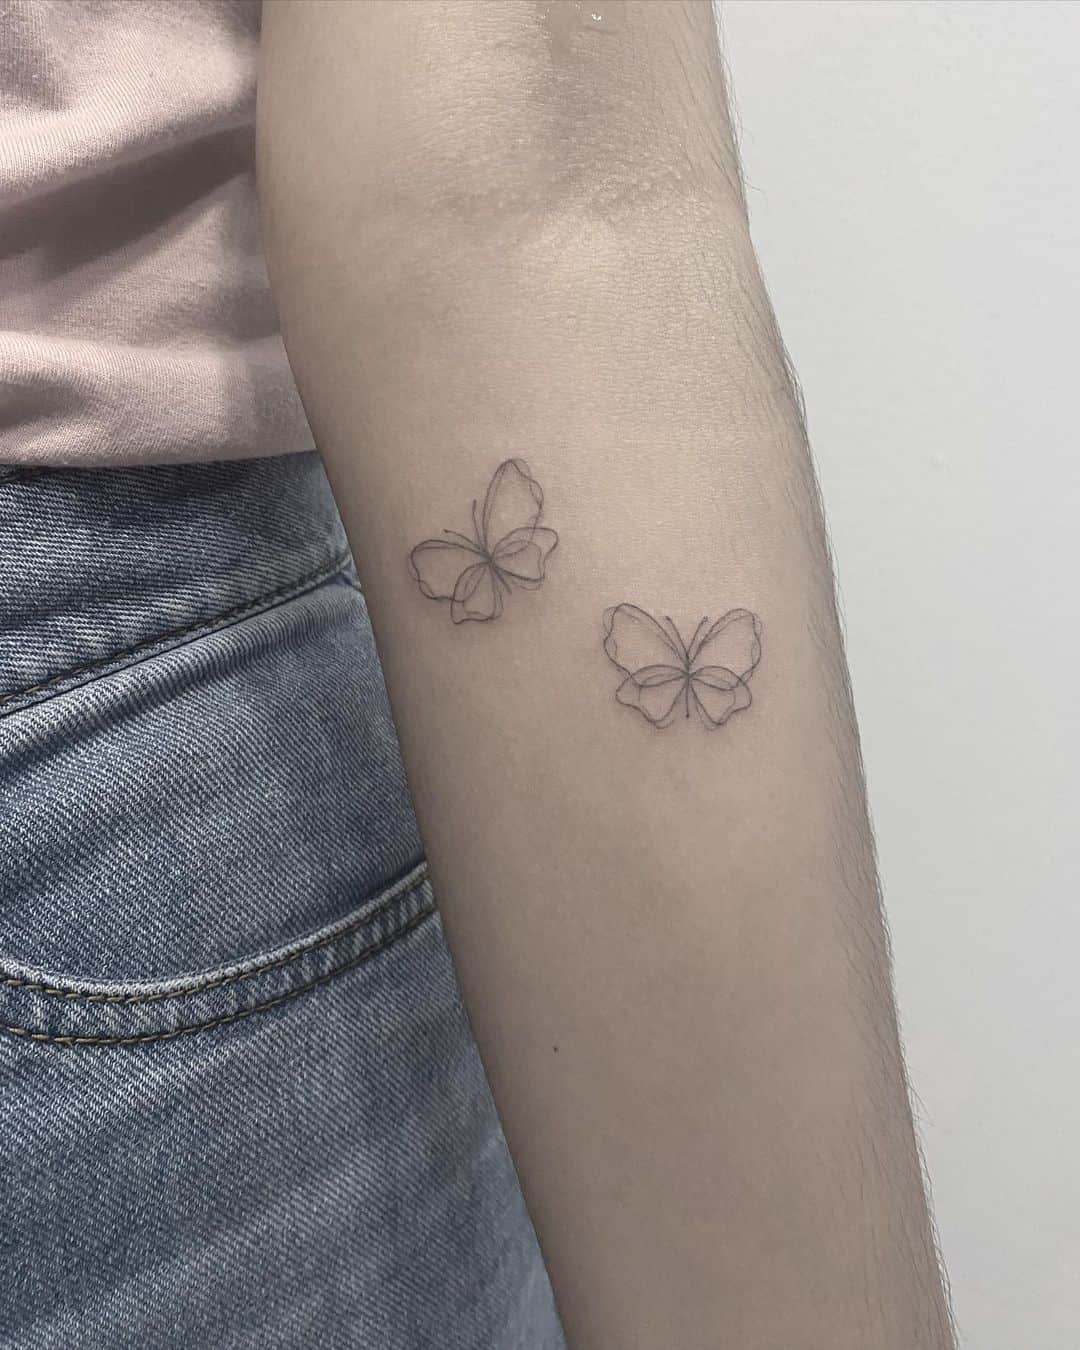 Butterfly Tattoo Meanings Not Just A Beautiful Tattoo